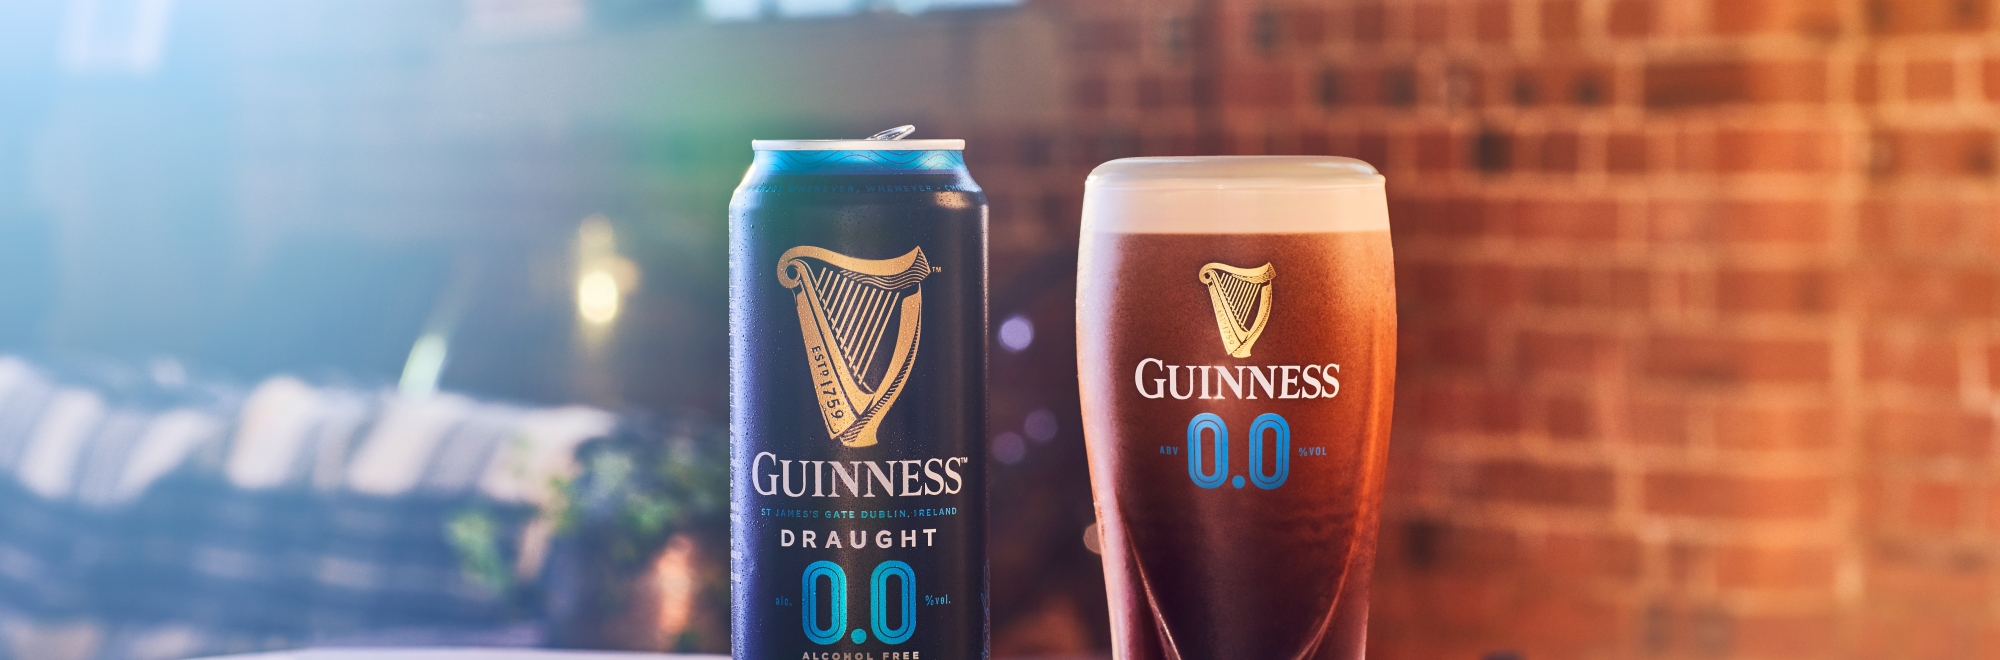 No need to wait any longer, alcohol-free Guinness is here